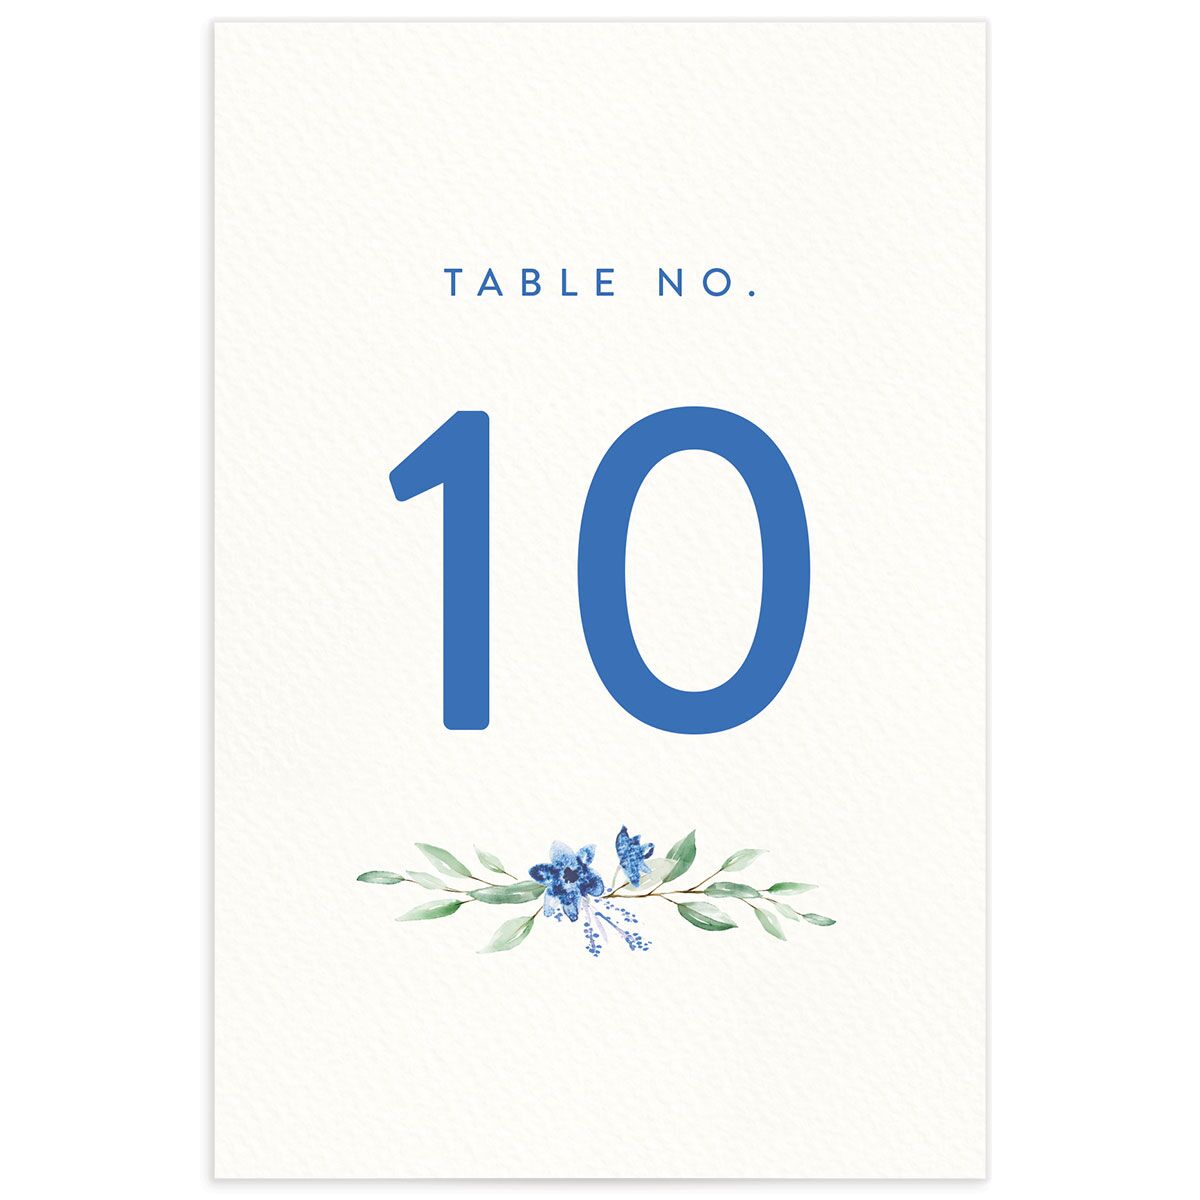 Rustic Emblem Table Numbers back in French Blue